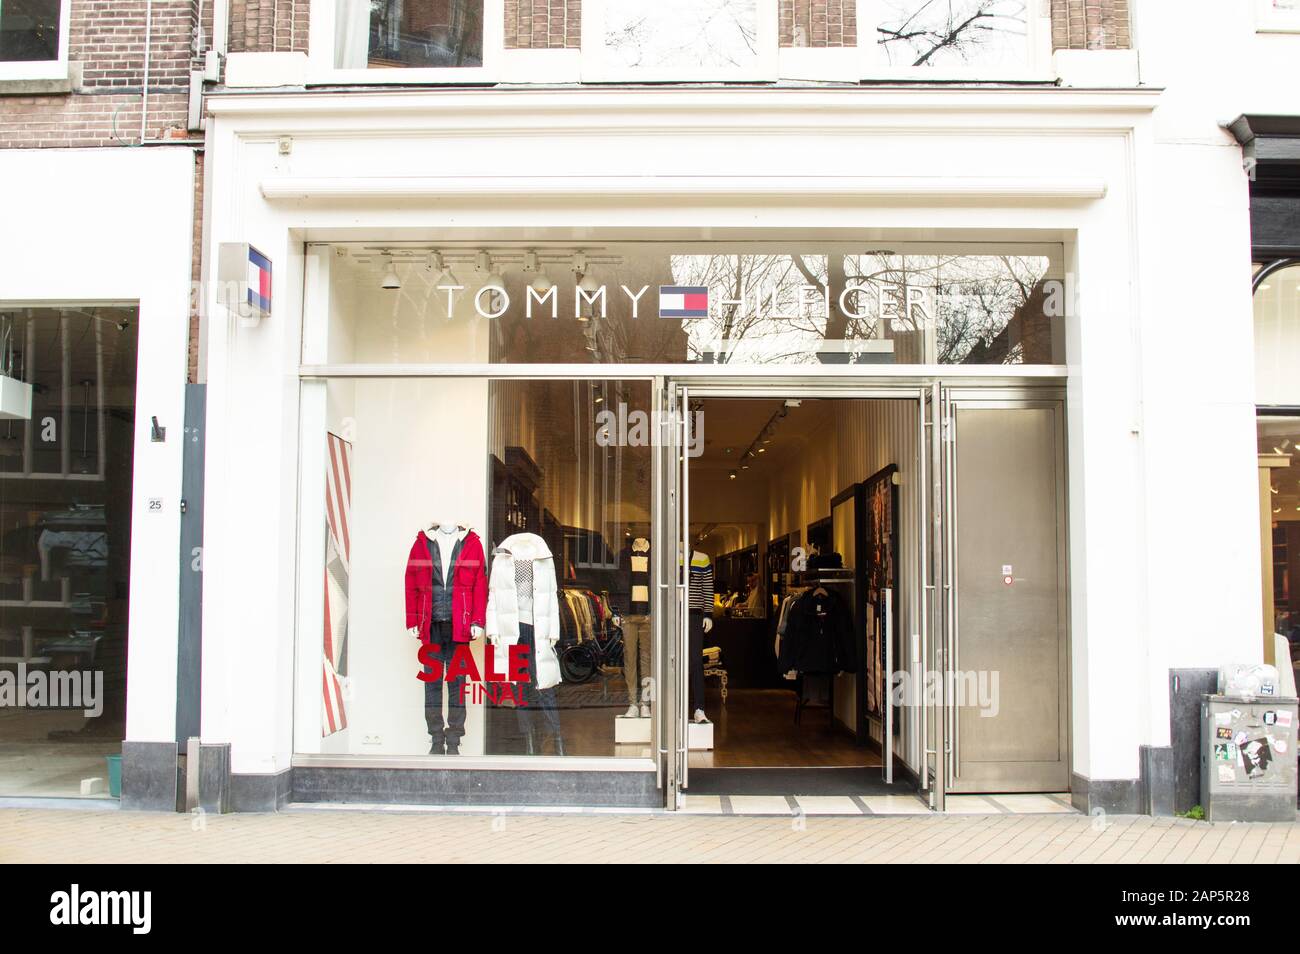 tommy online store